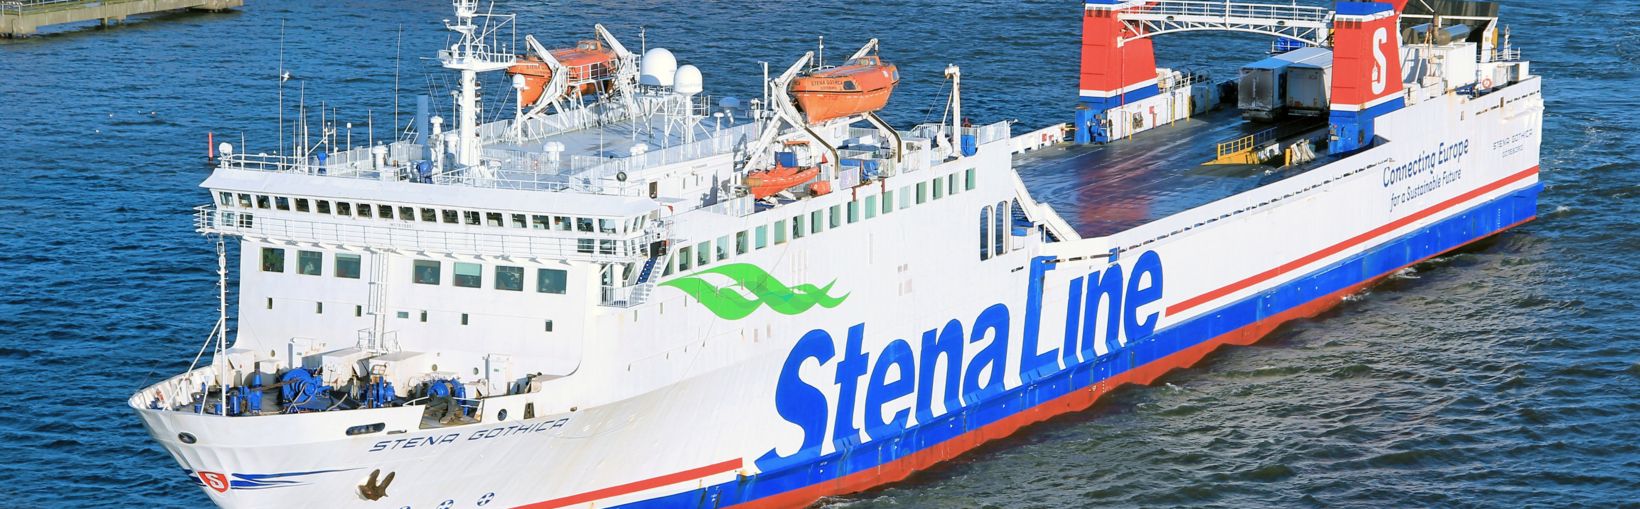 Stena Gothica ferry leaving the port